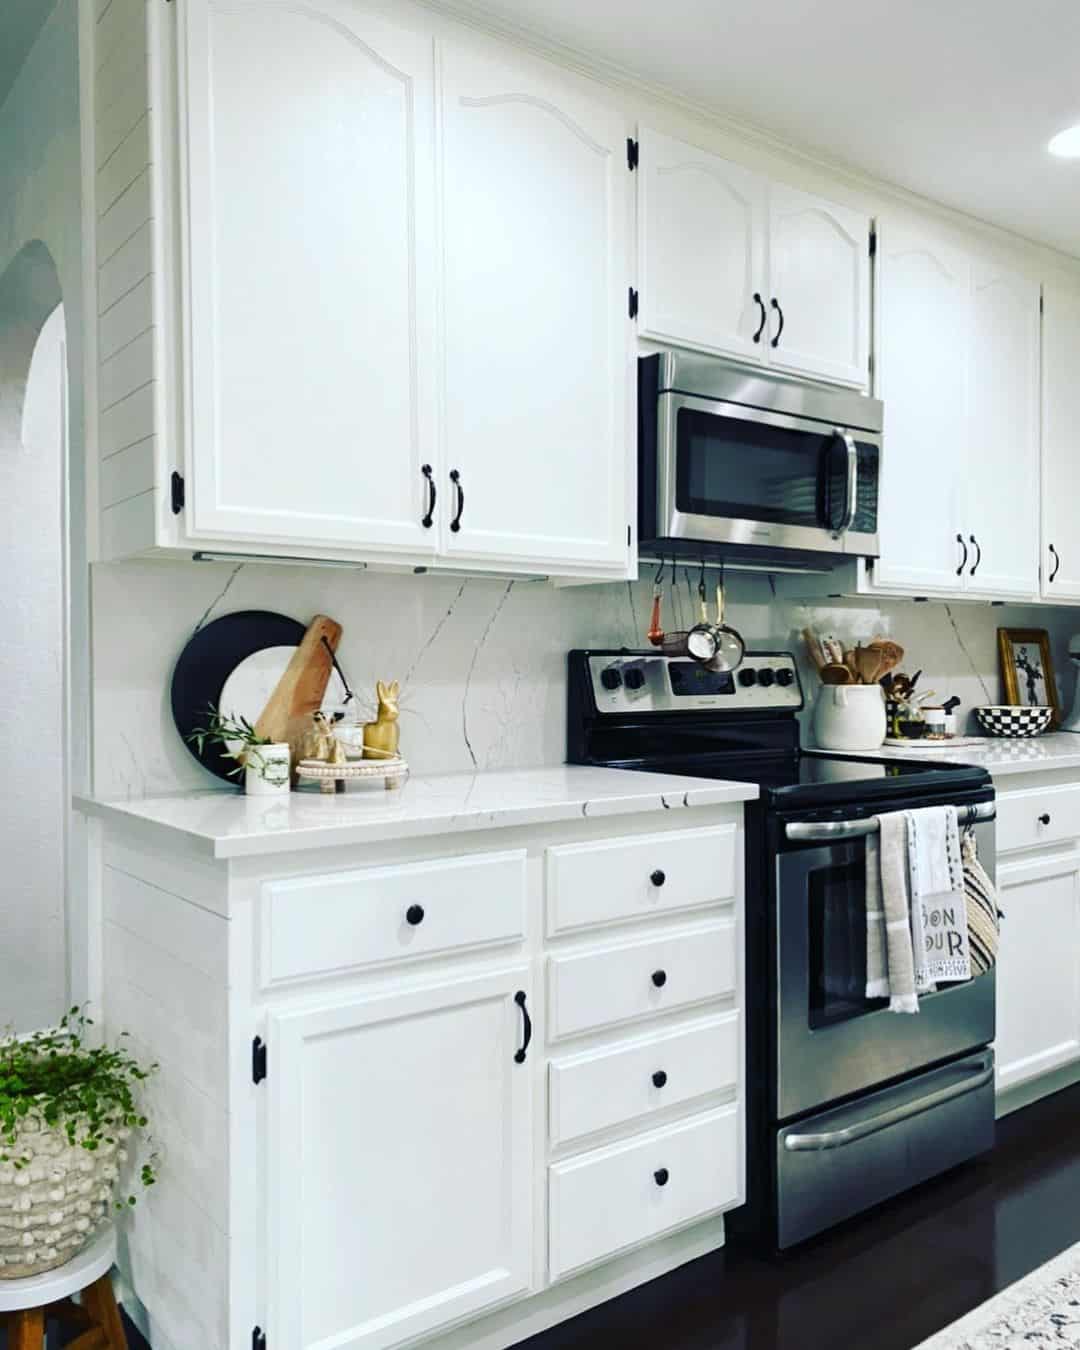 Marble Counters and Backsplash